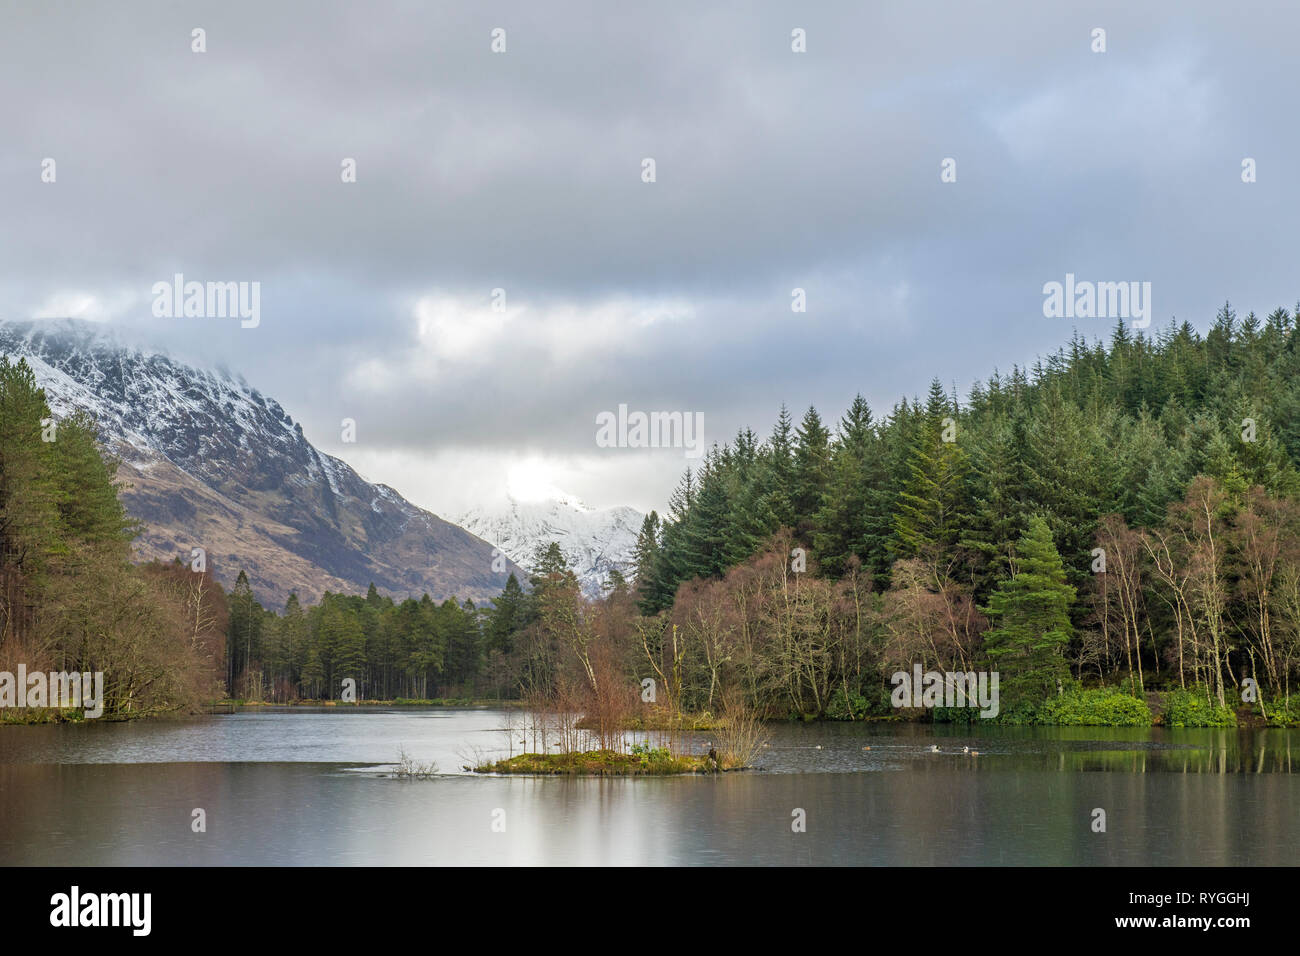 Glencoe Lochan in winter above the village of Glencoe in the Scottish Highlands. Views from the lochan are superb, ao it's very popular with walkers.. Stock Photo